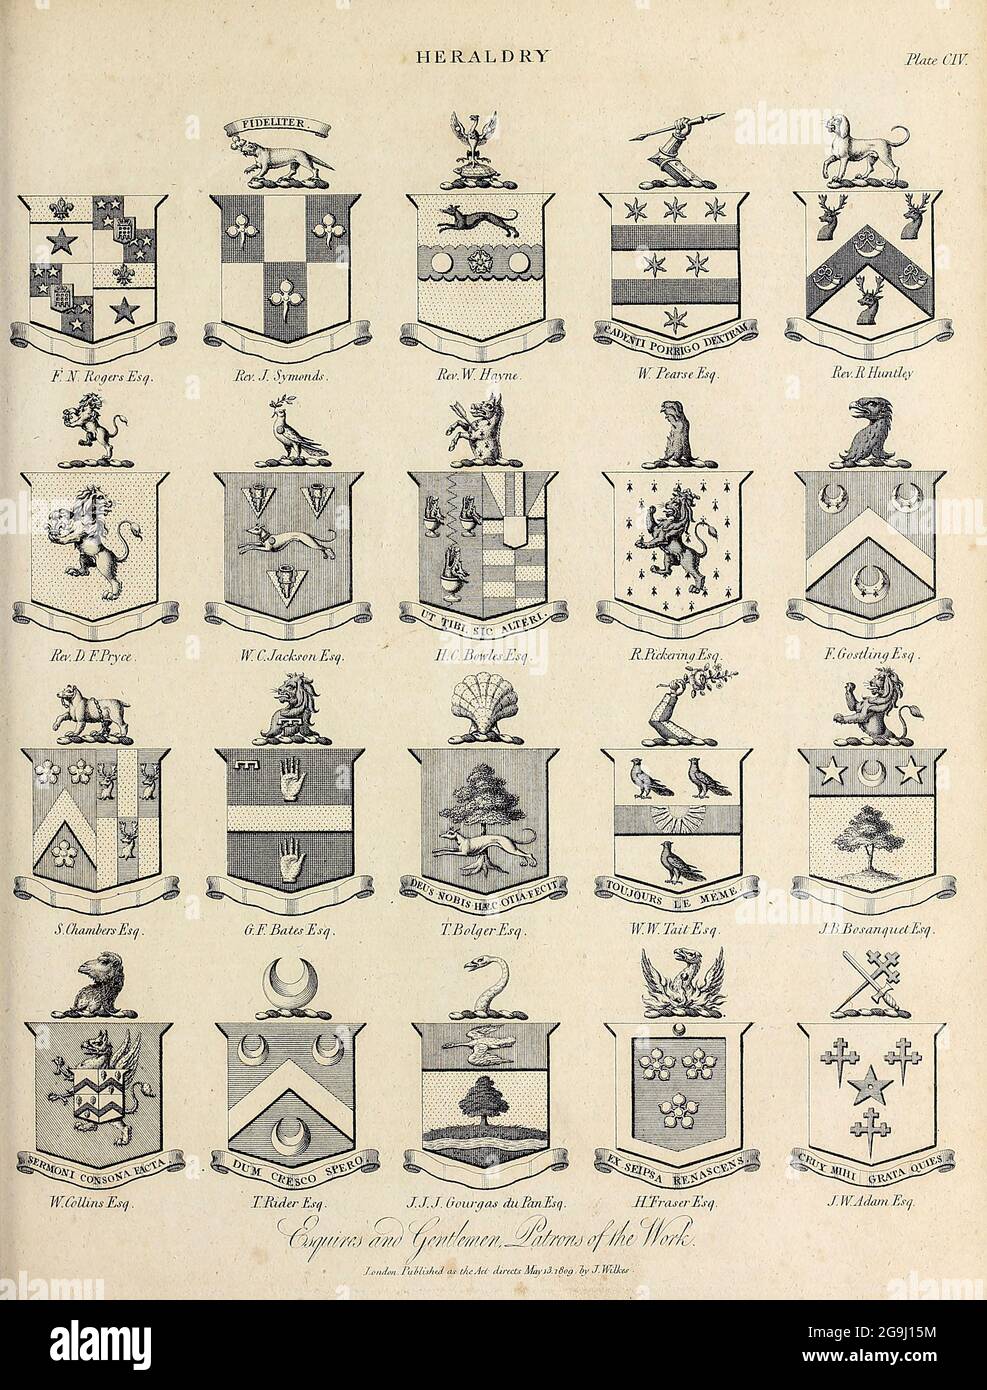 Esquires and Gentlemen Heraldry is a discipline relating to the design, display and study of armorial bearings (known as armory), as well as related disciplines, such as vexillology, together with the study of ceremony, rank and pedigree. Armory, the best-known branch of heraldry, concerns the design and transmission of the heraldic achievement. The achievement, or armorial bearings usually includes a coat of arms on a shield, helmet and crest, together with any accompanying devices, such as supporters, badges, heraldic banners and mottoes. Copperplate engraving From the Encyclopaedia Londinen Stock Photo